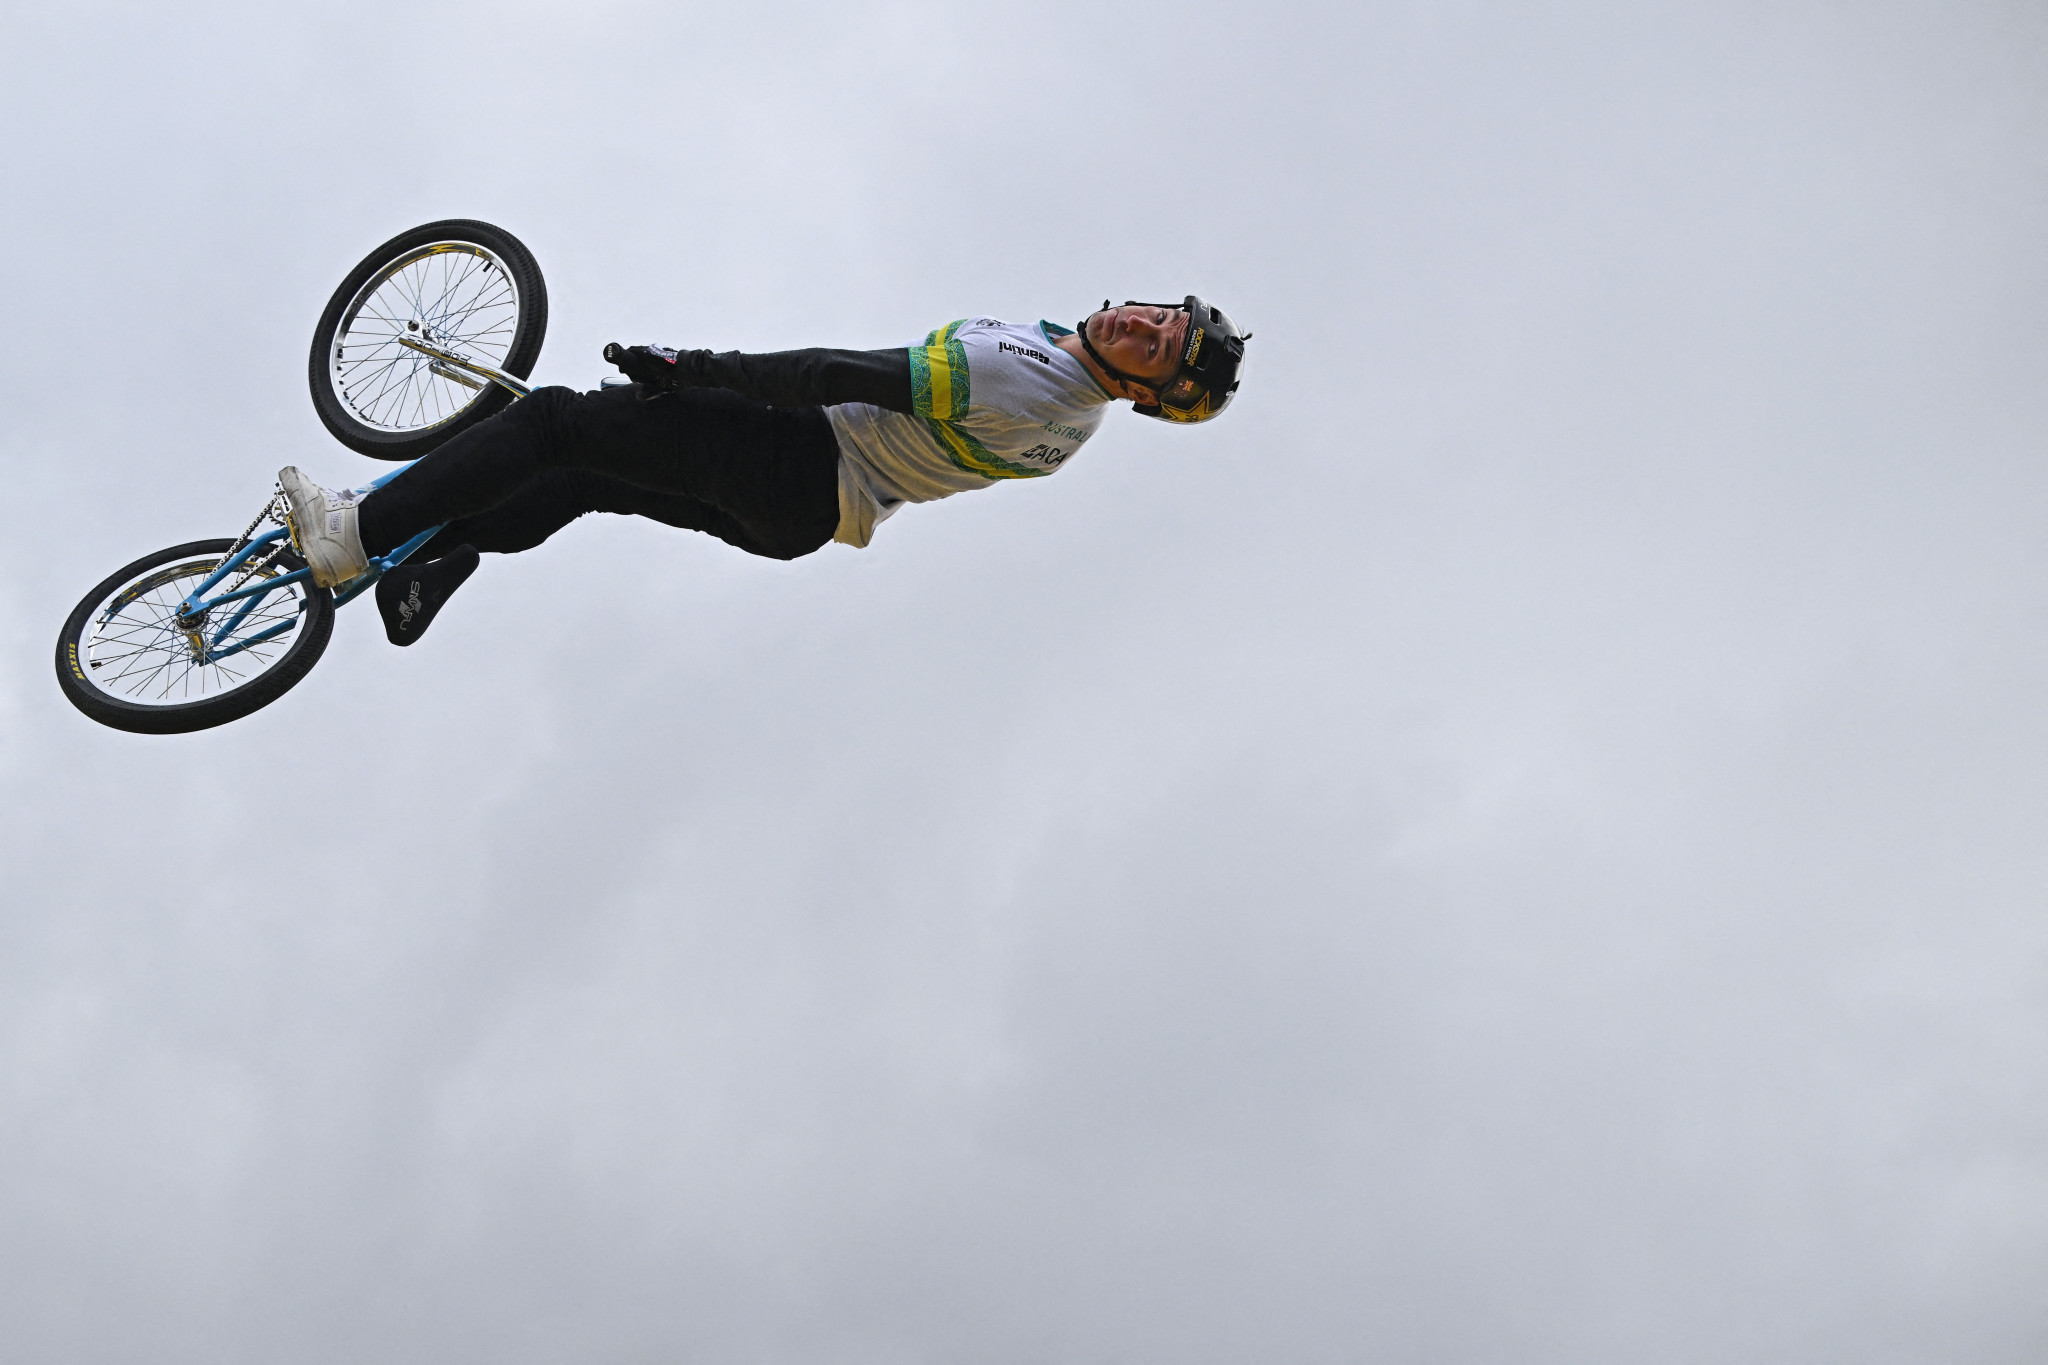 Logan Martin won gold in China to seal overall BMX Freestyle World Cup glory ©Getty Images